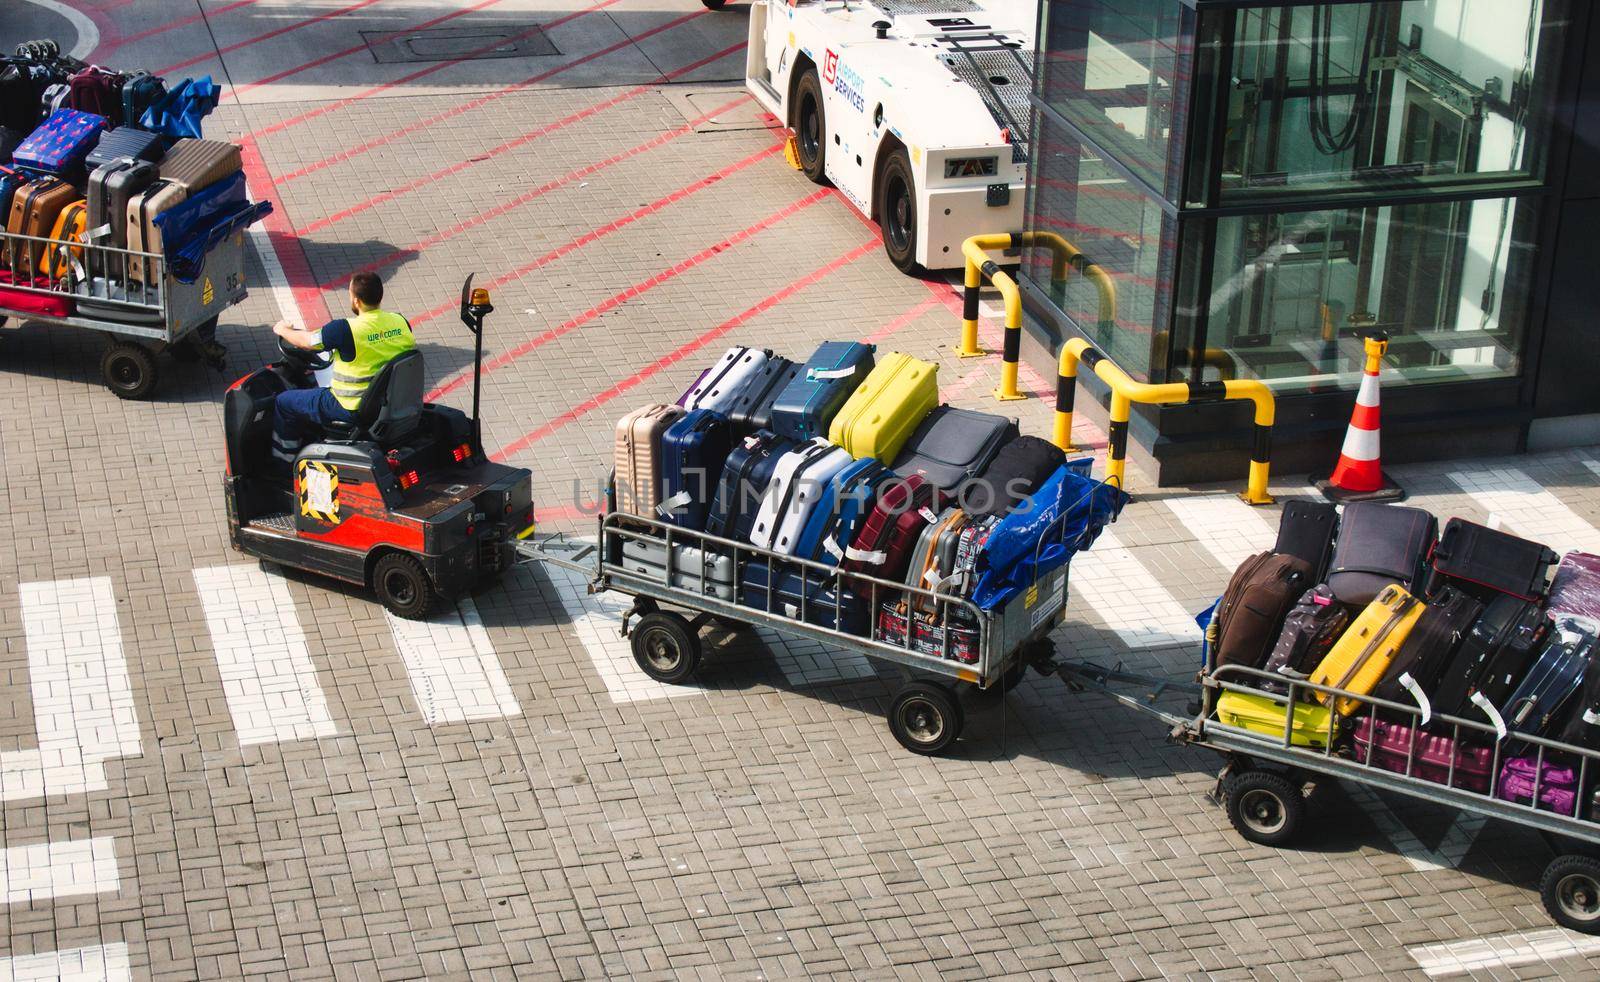 04 August 2019 - London, England: Motorised baggage cart carrying luggage at an airport runway by tennesseewitney